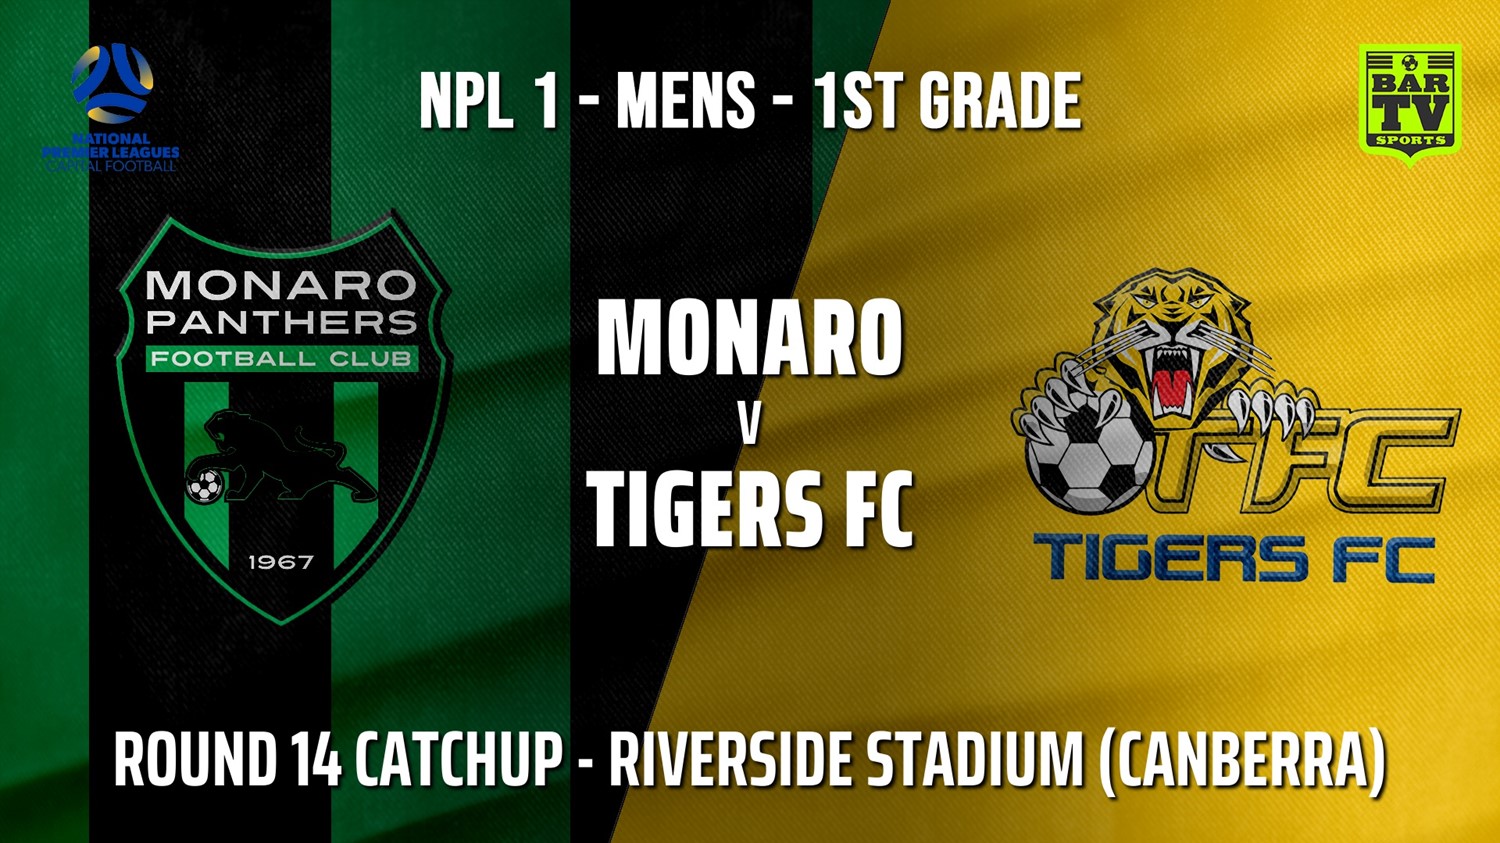 210811-Capital NPL Round 14 Catchup - Monaro Panthers FC v Tigers FC Slate Image